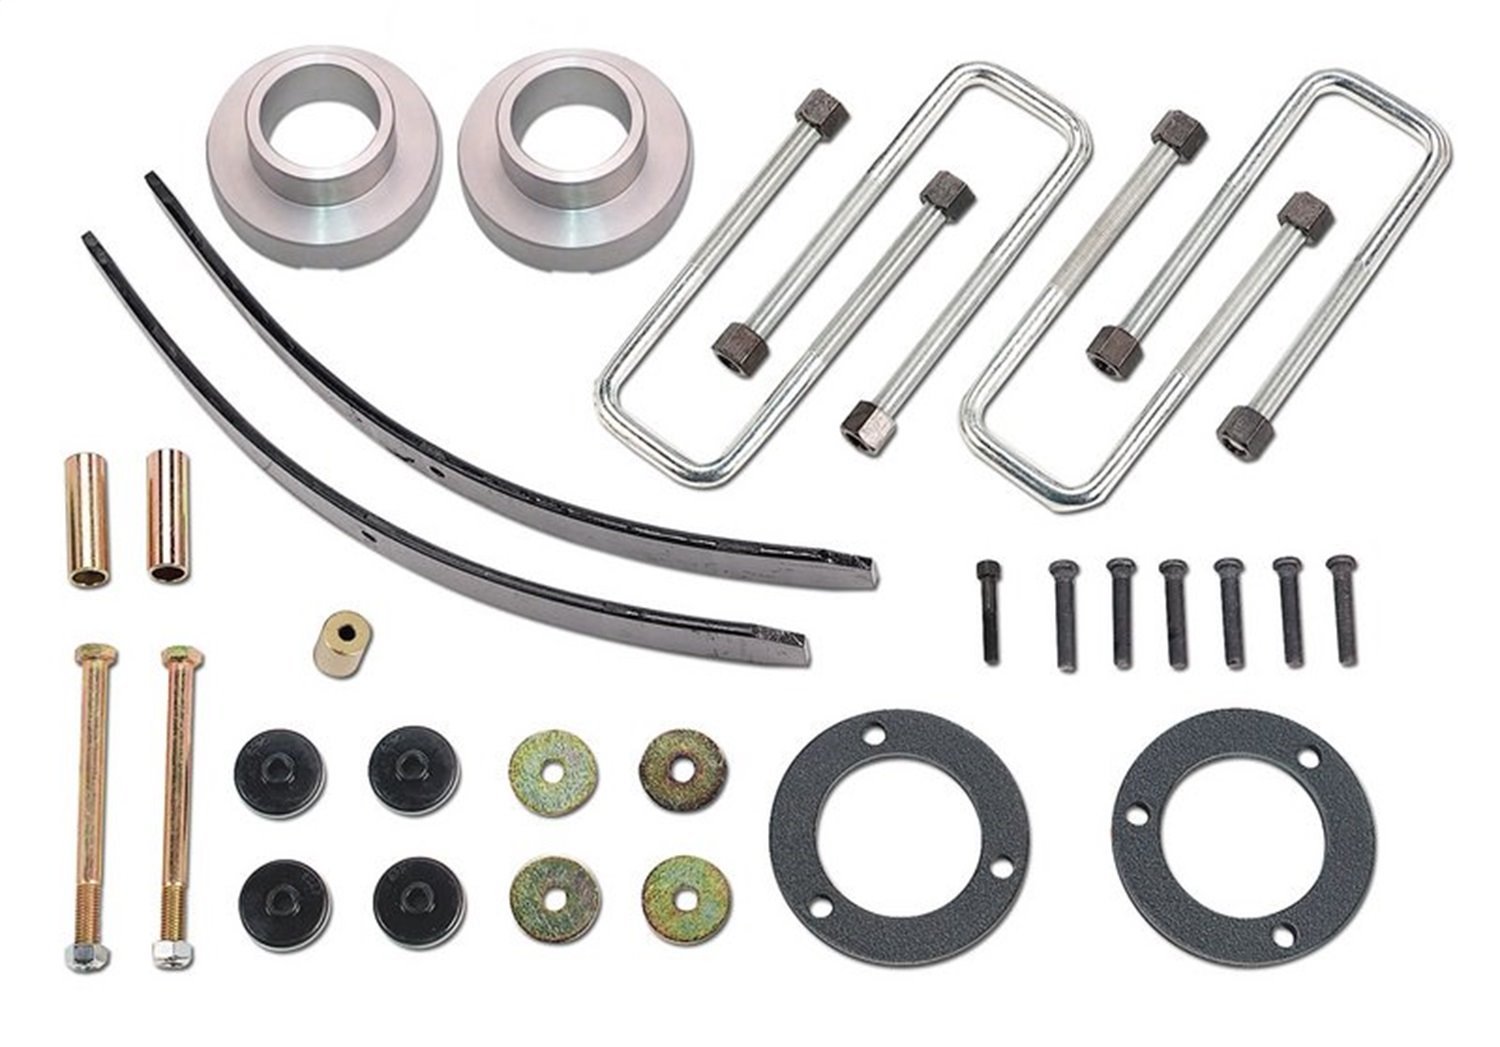 Suspension Lift Kit 2005-16 Toyota Tacoma 4wd & 2wd Pre-Runner